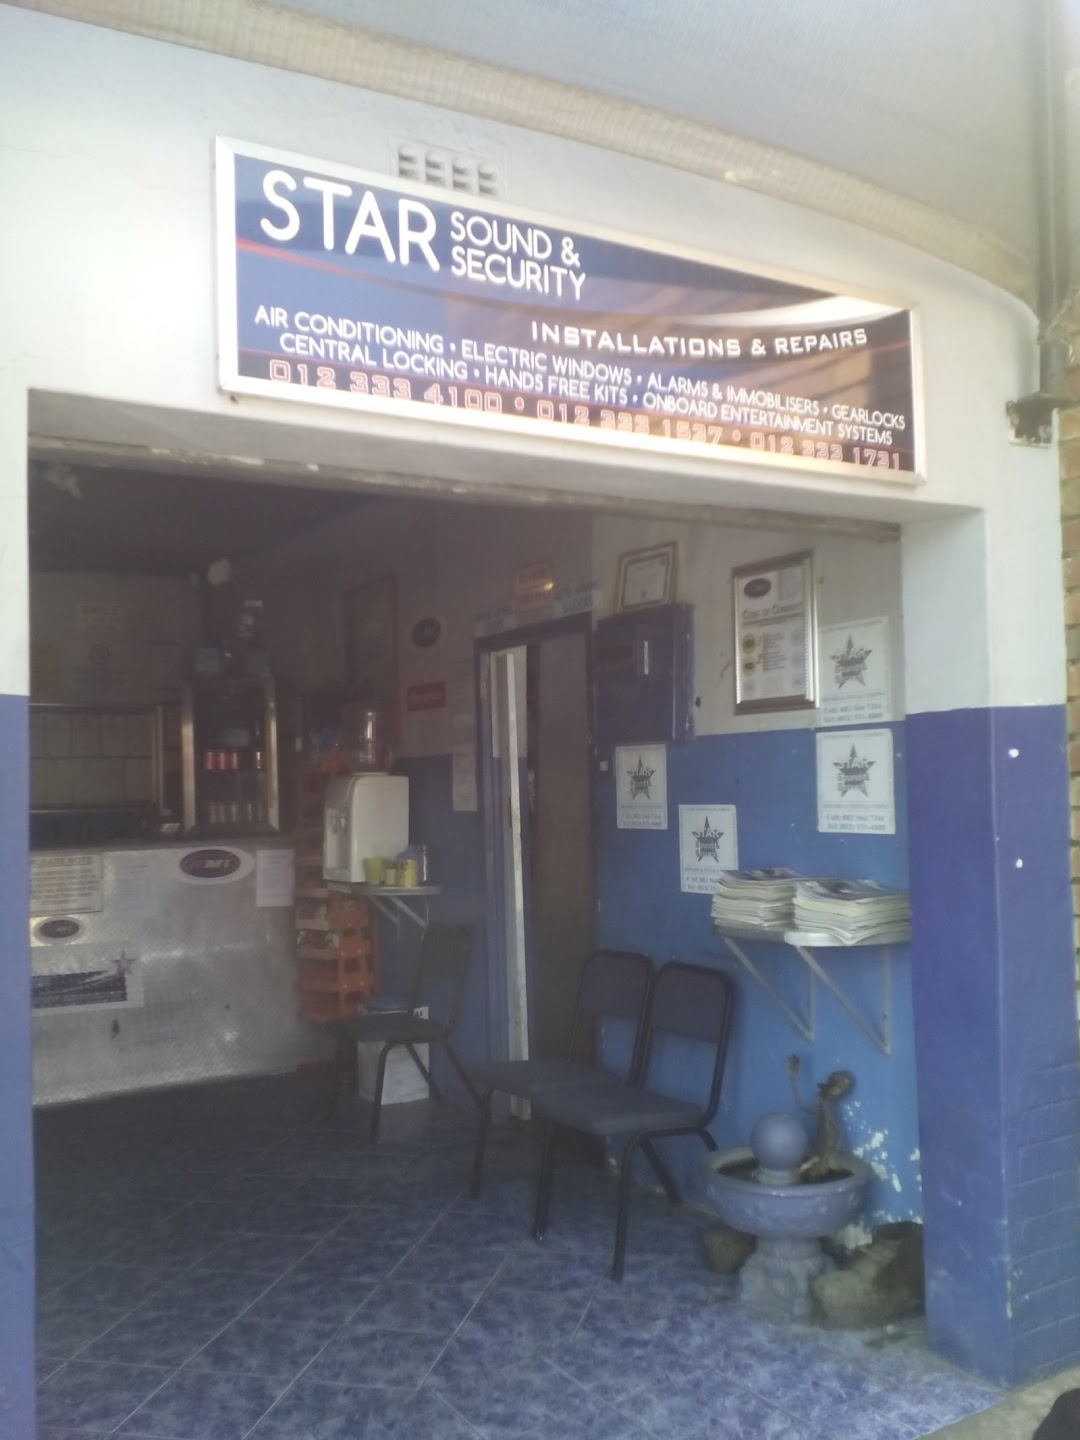 Star Sound And Security